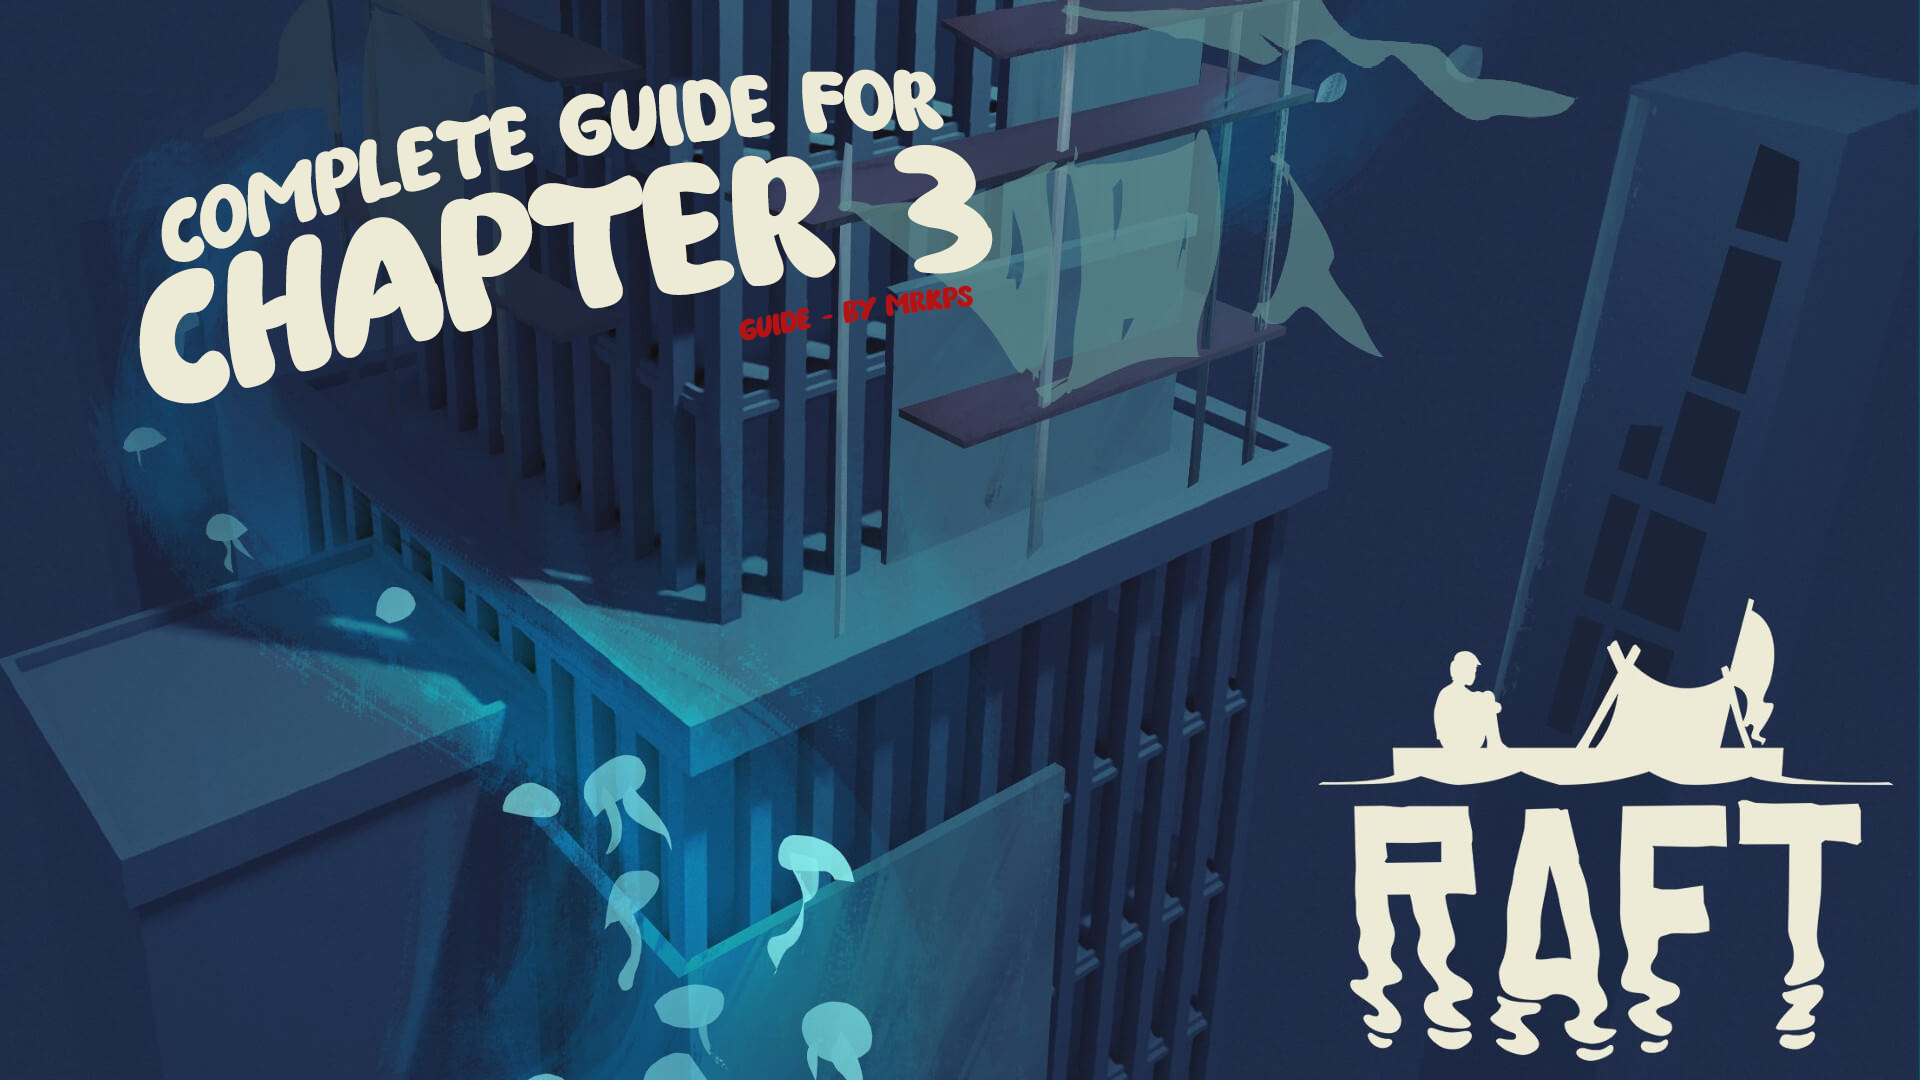 Raft - Chapter 3 Complete Guide - Welcome - 6C33074